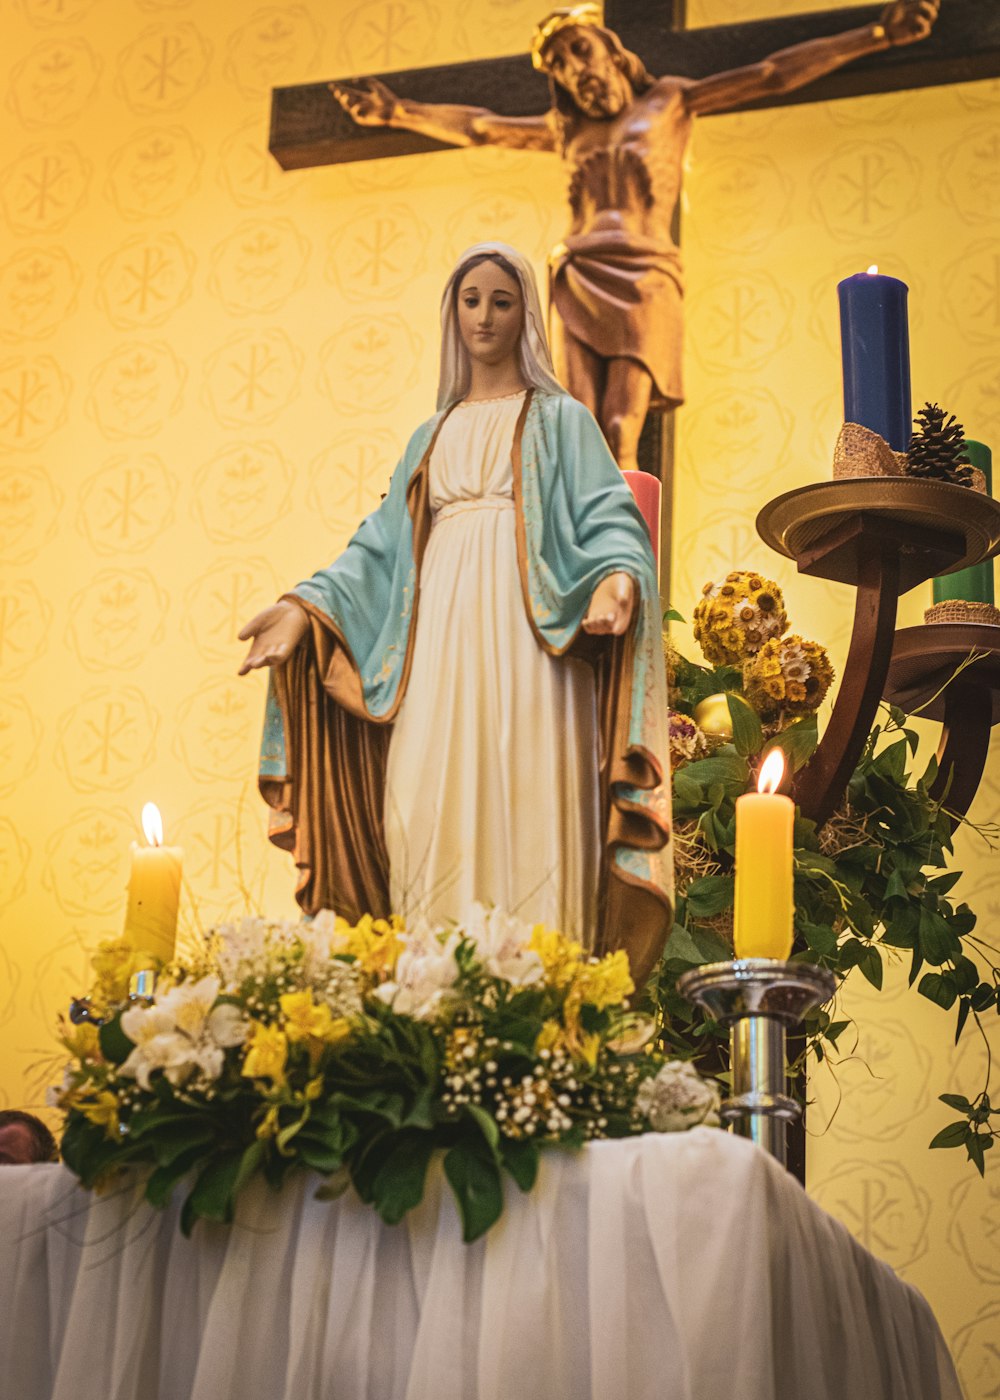 Mother Mary Images – The Ultimate Collection of Over 999 Stunning High-resolution 4K Mother Mary Images